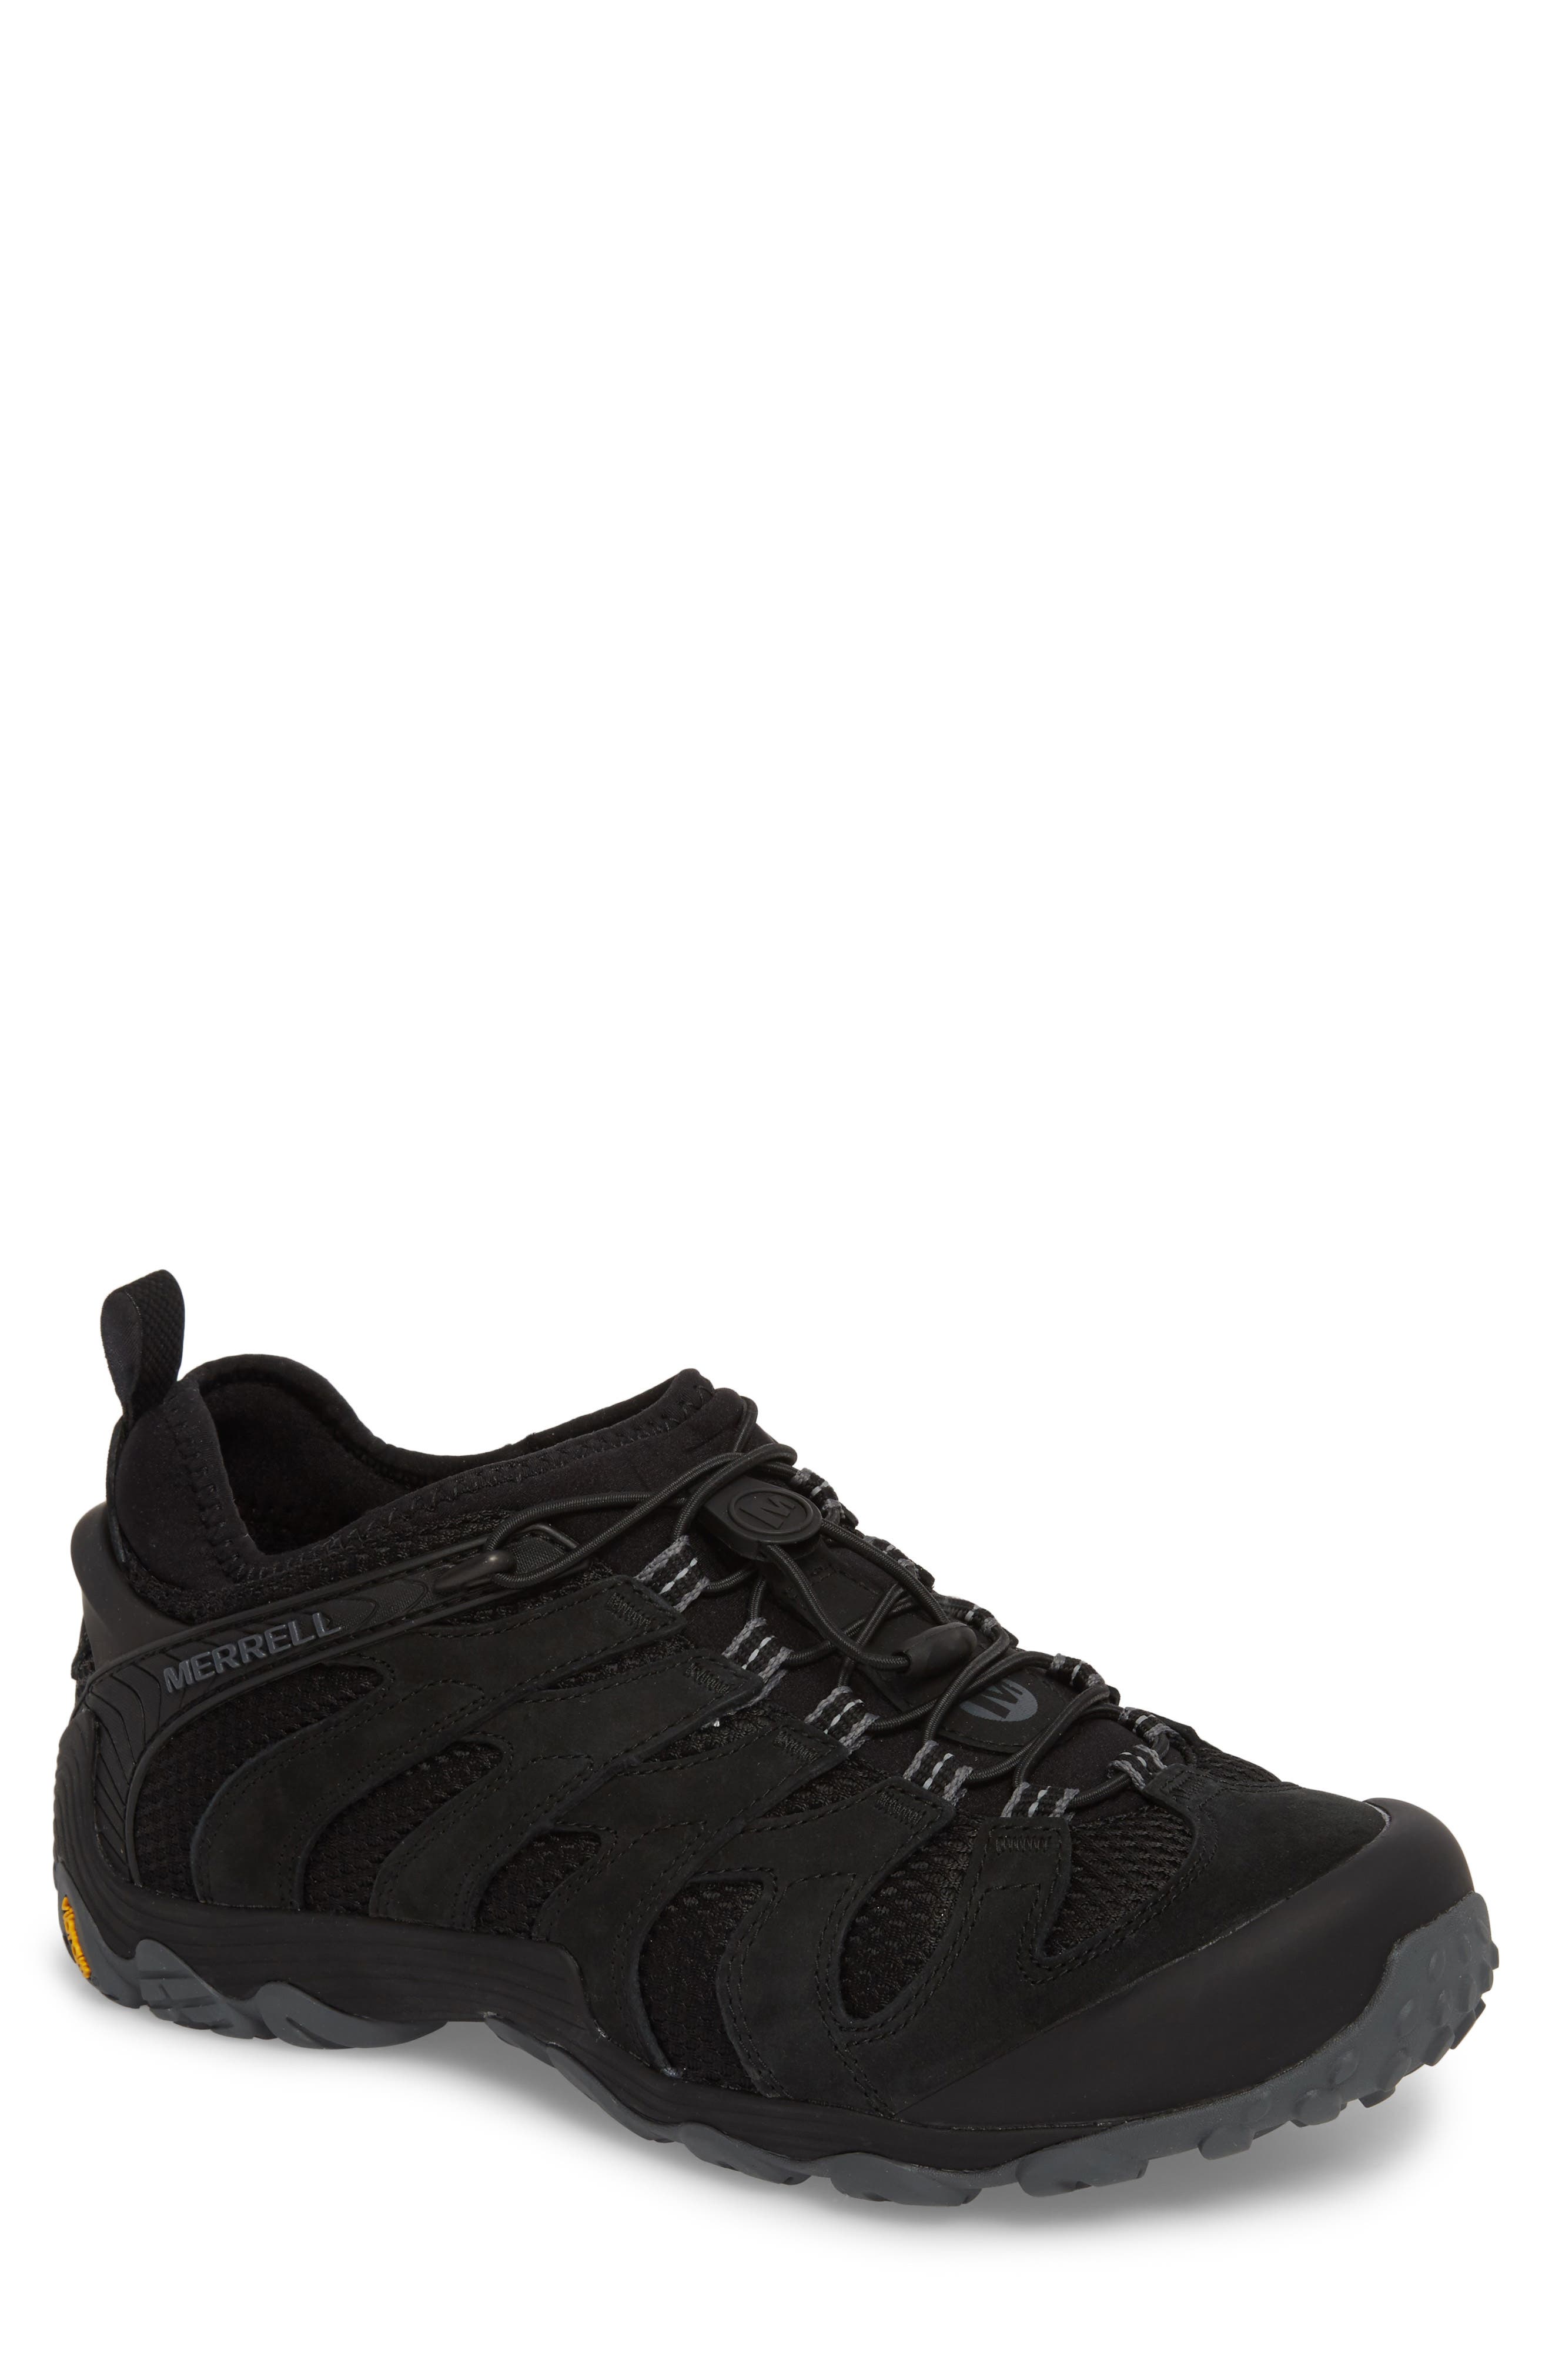 Athletic Shoes Merrell Shoes | Nordstrom